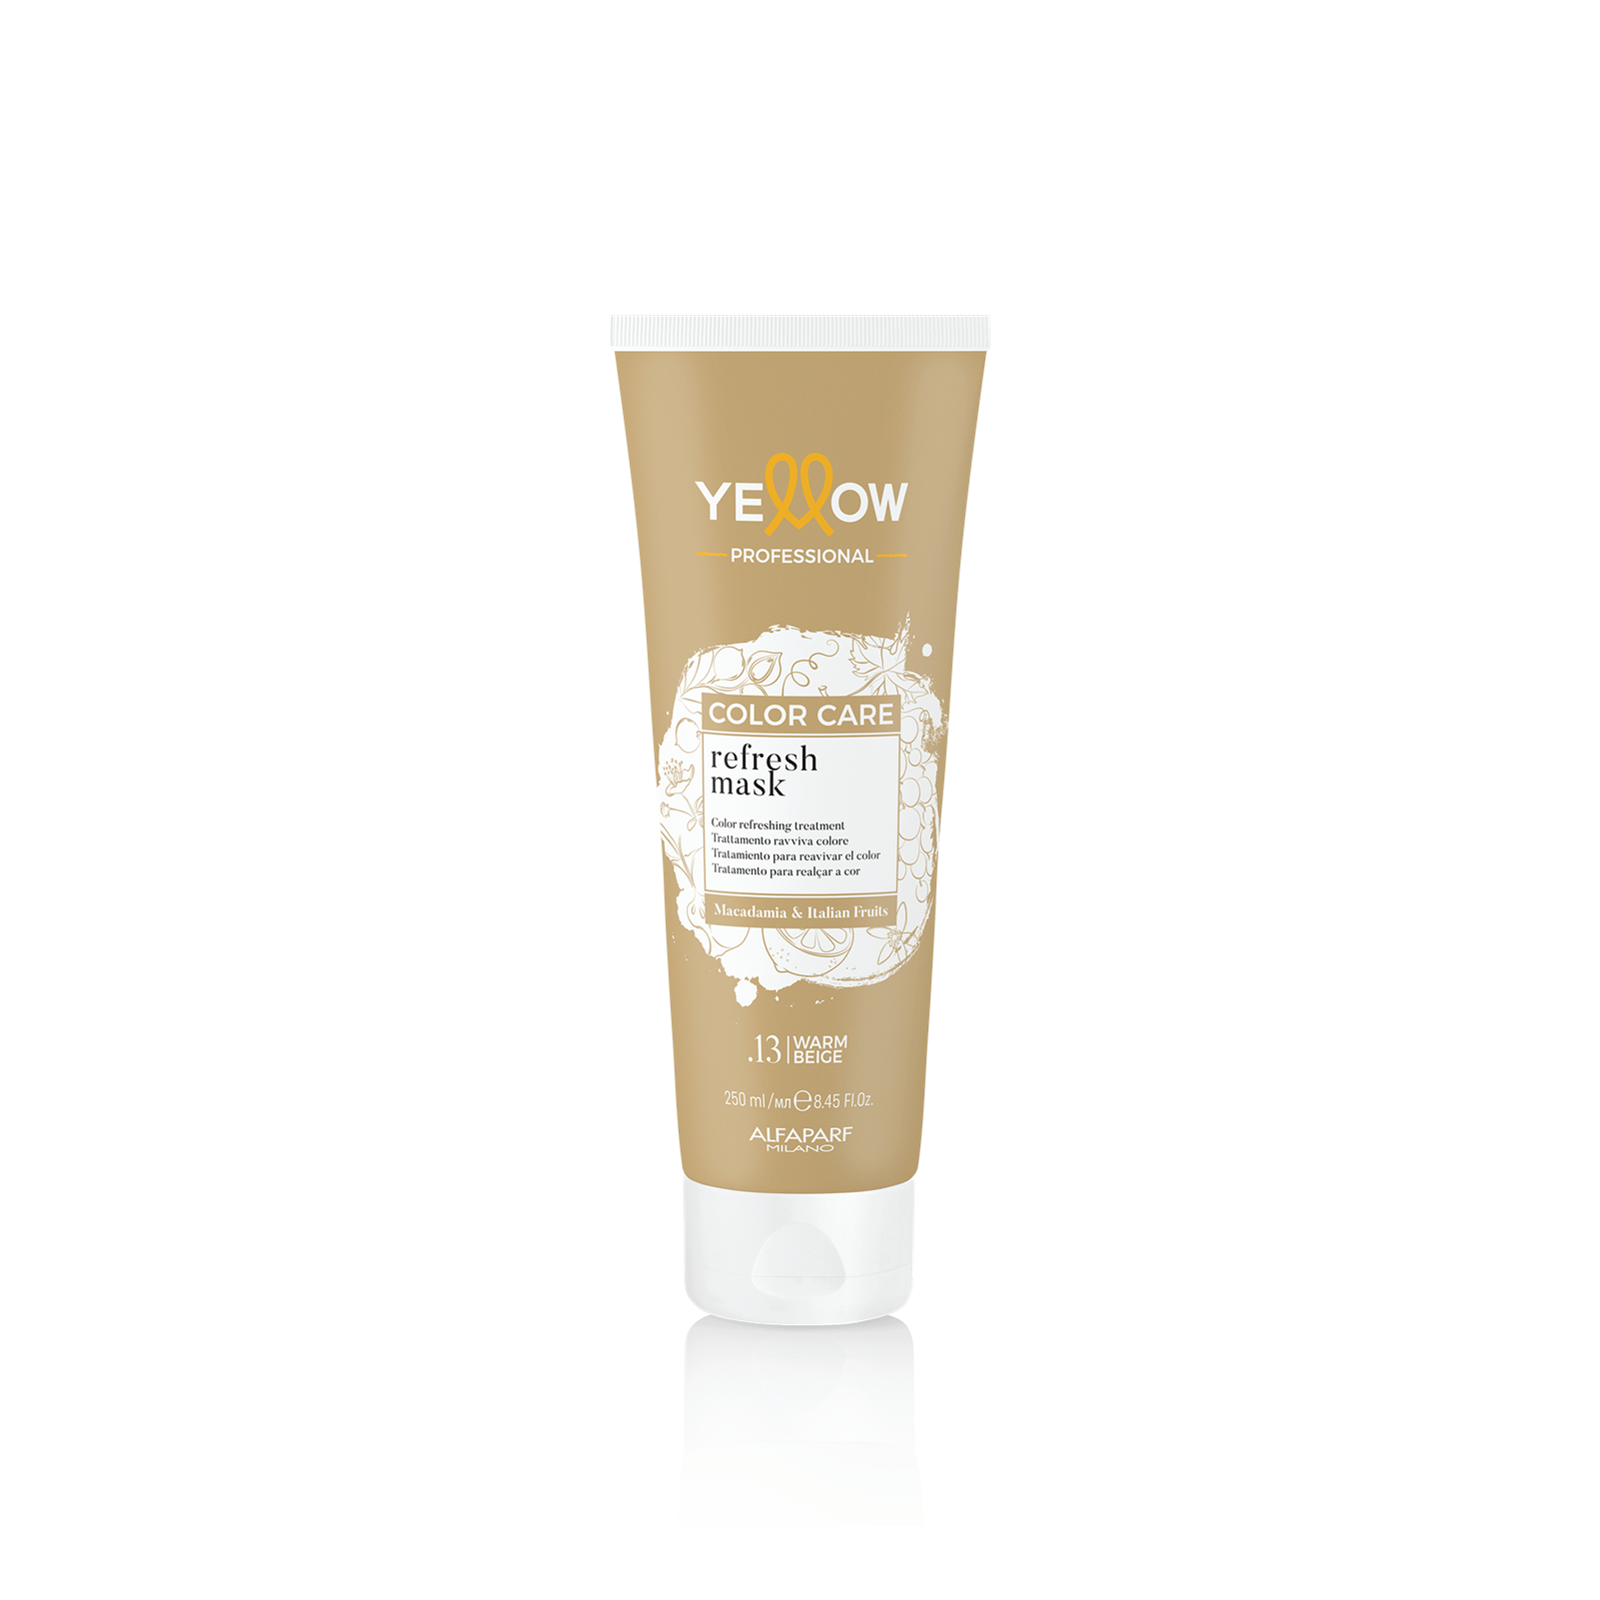 Yellow Professional Color Care Refresh Mask .13 Warm Beige 250ml